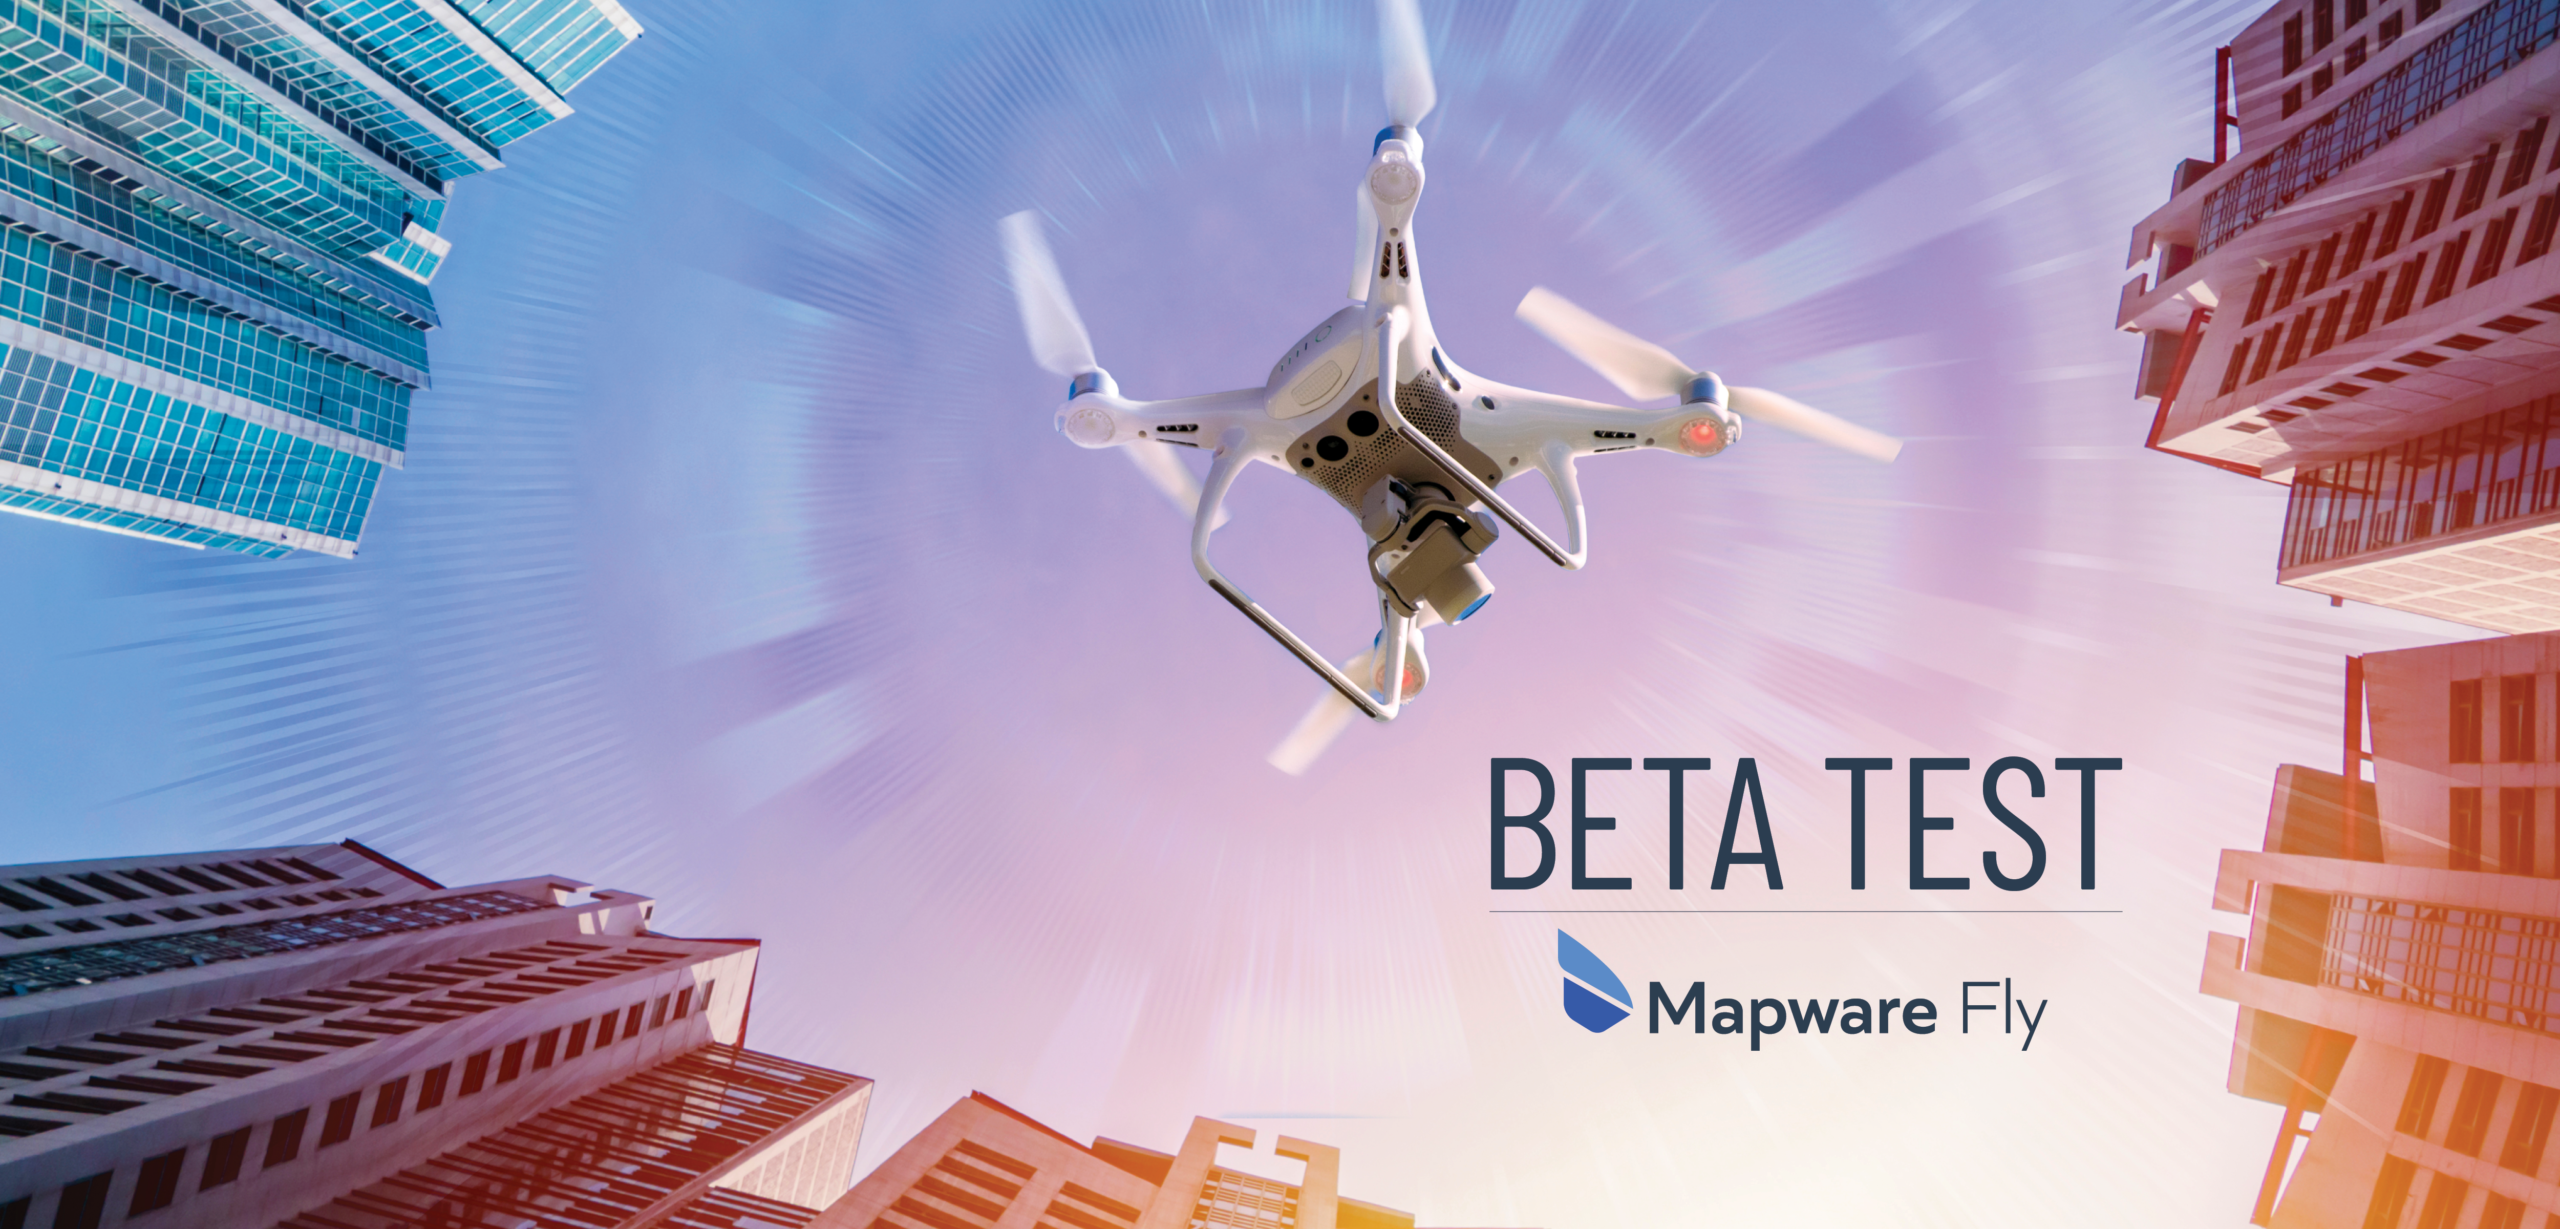 Five Reasons to Beta Test Mapware Fly Right Now